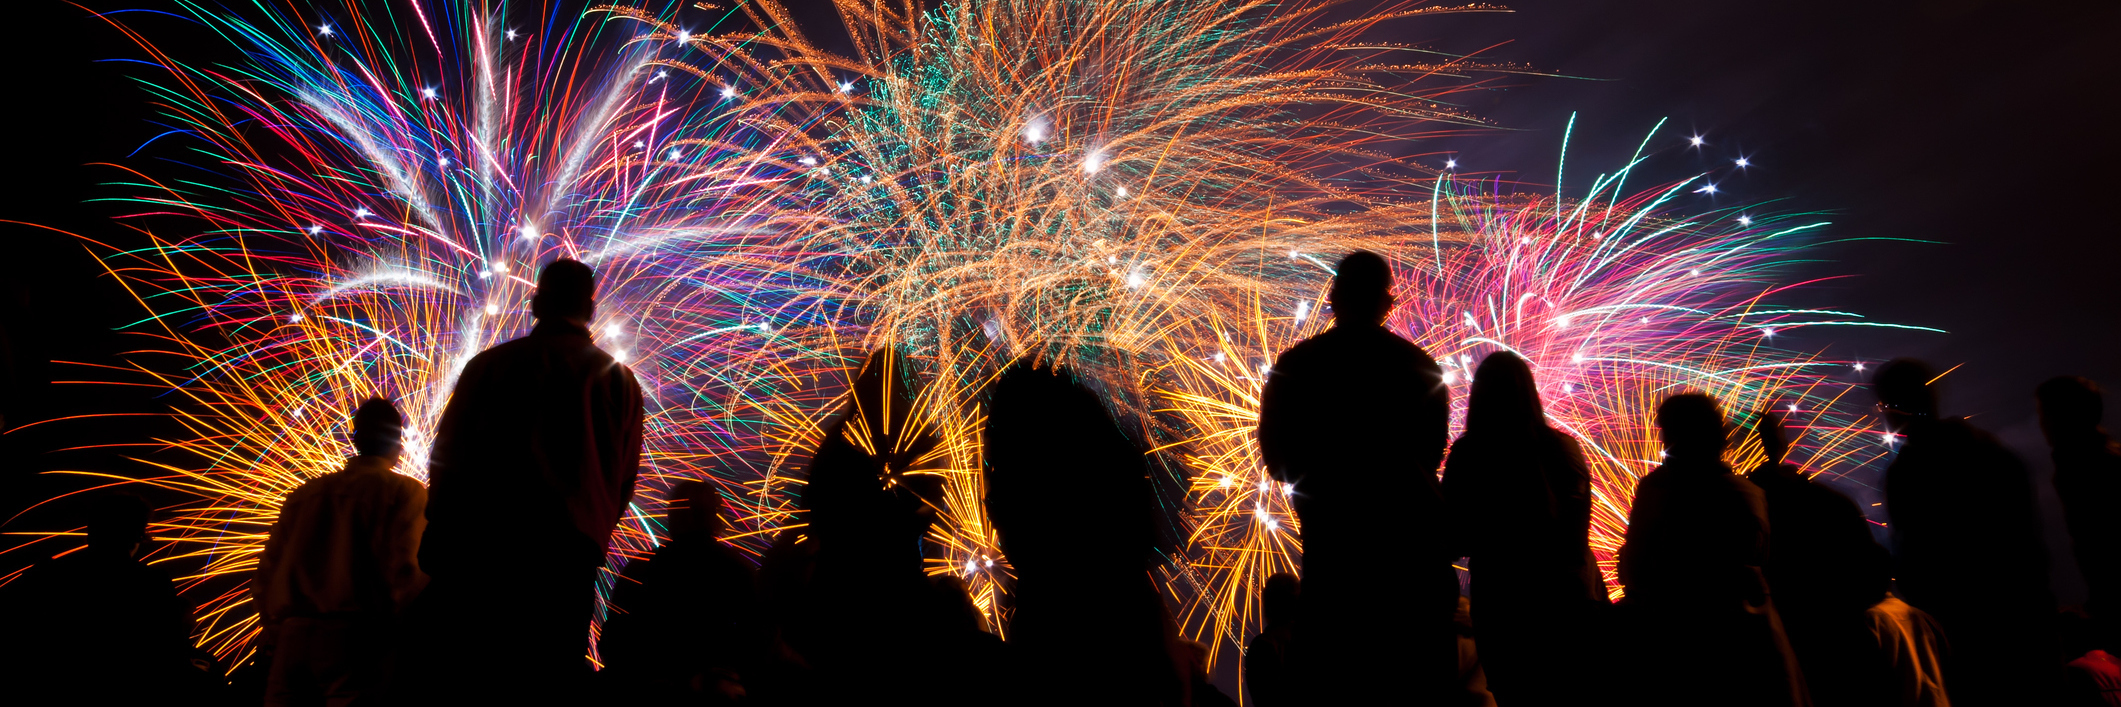 silhouettes of people watching fireworks